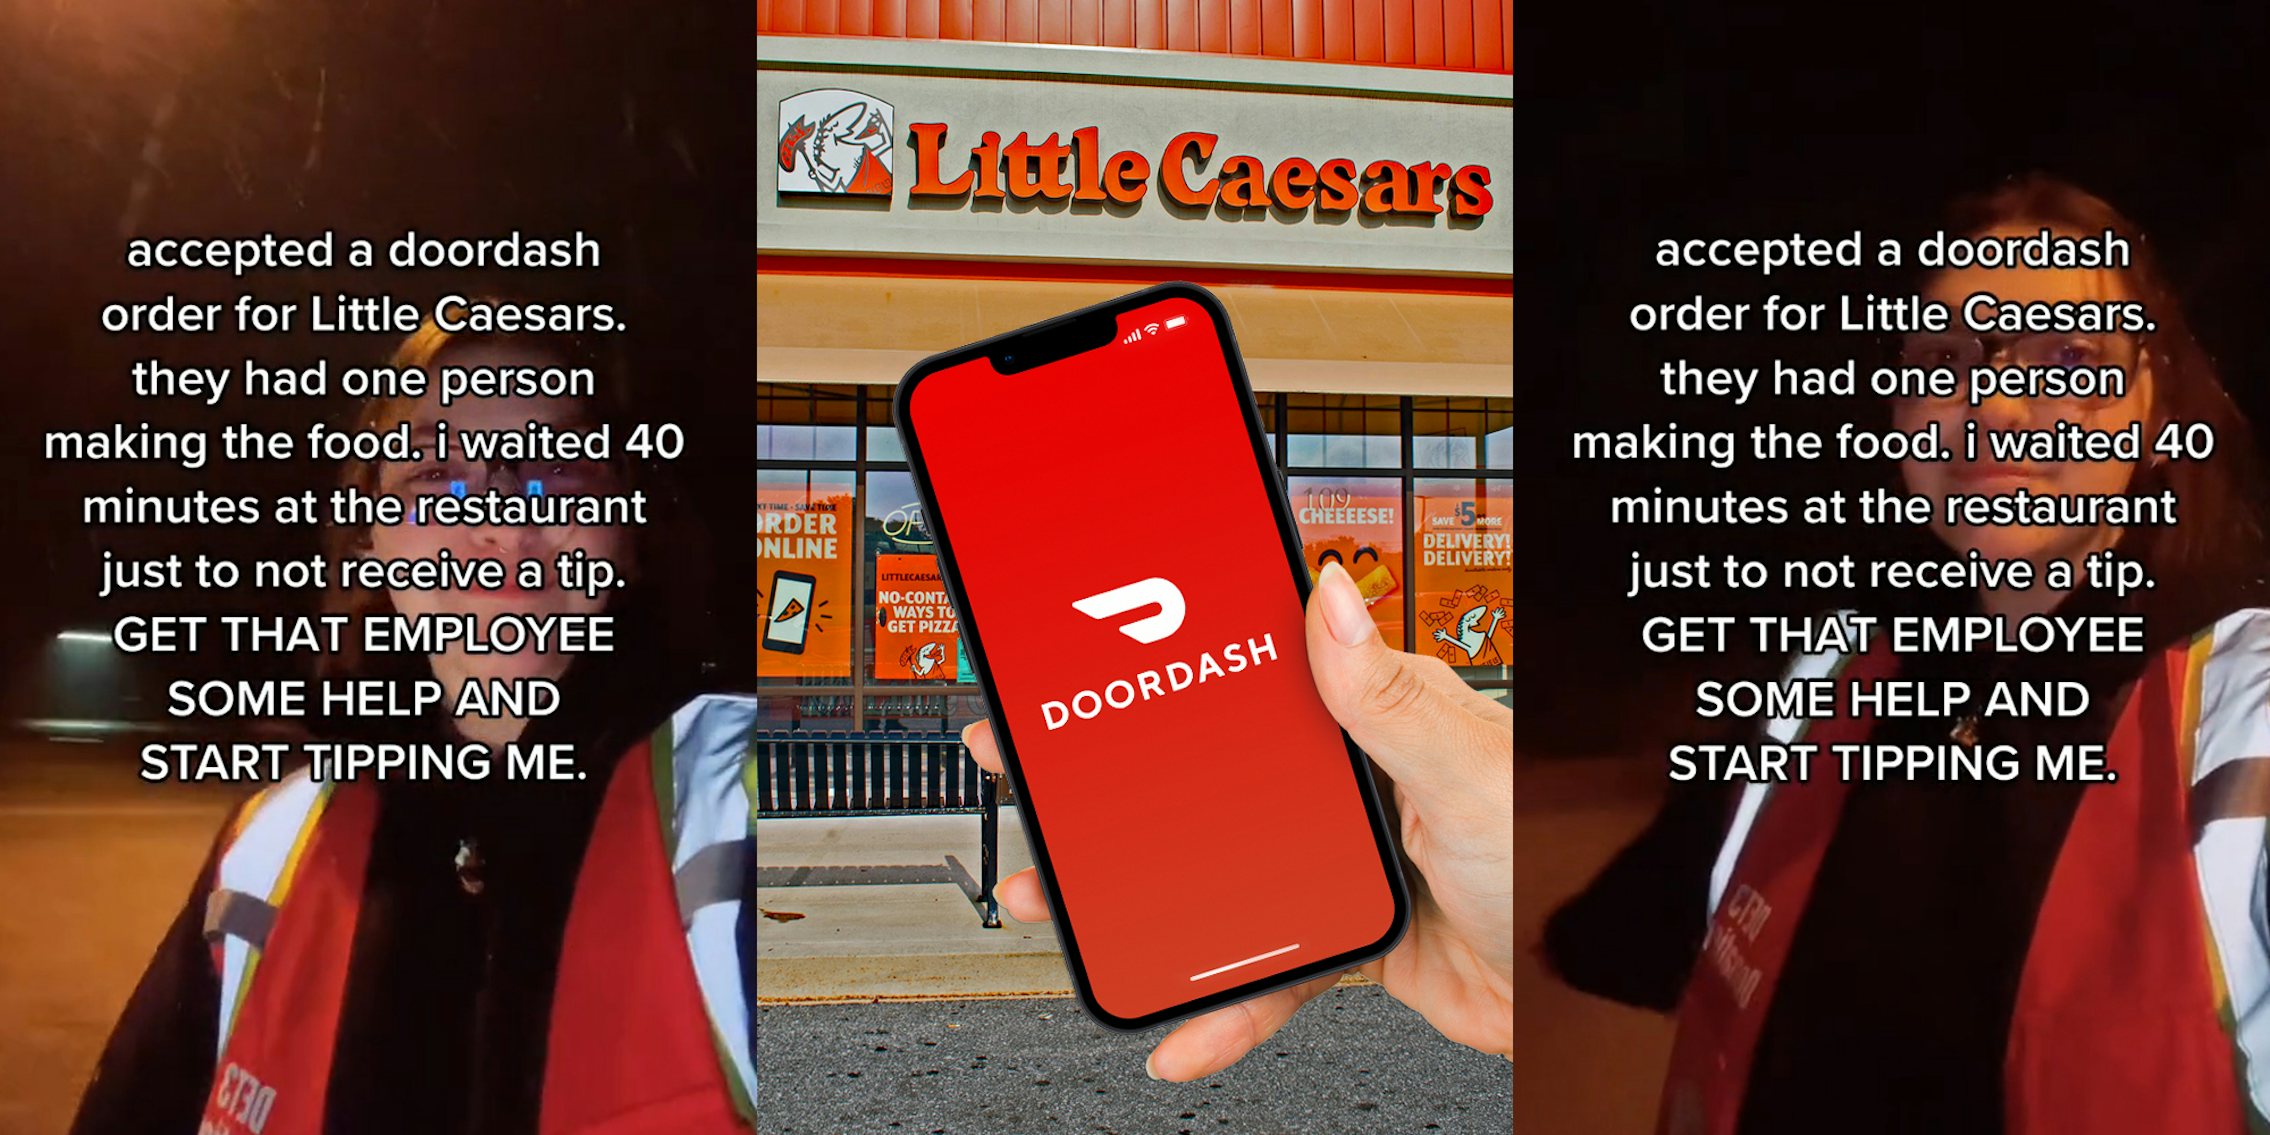 DoorDash employee outside with caption 'accepted a doordash order for Little Caesars, they had one person making the food. i waited 40 minutes at the restaurant just to not receive a tip, GET THAT EMPLOYEE SOME HELP AND START TIPPING ME.' (l) Little Caesars building with sign with hand holding phone with DoorDash on screen in front (c) DoorDash employee outside with caption 'accepted a doordash order for Little Caesars, they had one person making the food. i waited 40 minutes at the restaurant just to not receive a tip, GET THAT EMPLOYEE SOME HELP AND START TIPPING ME.' (r)